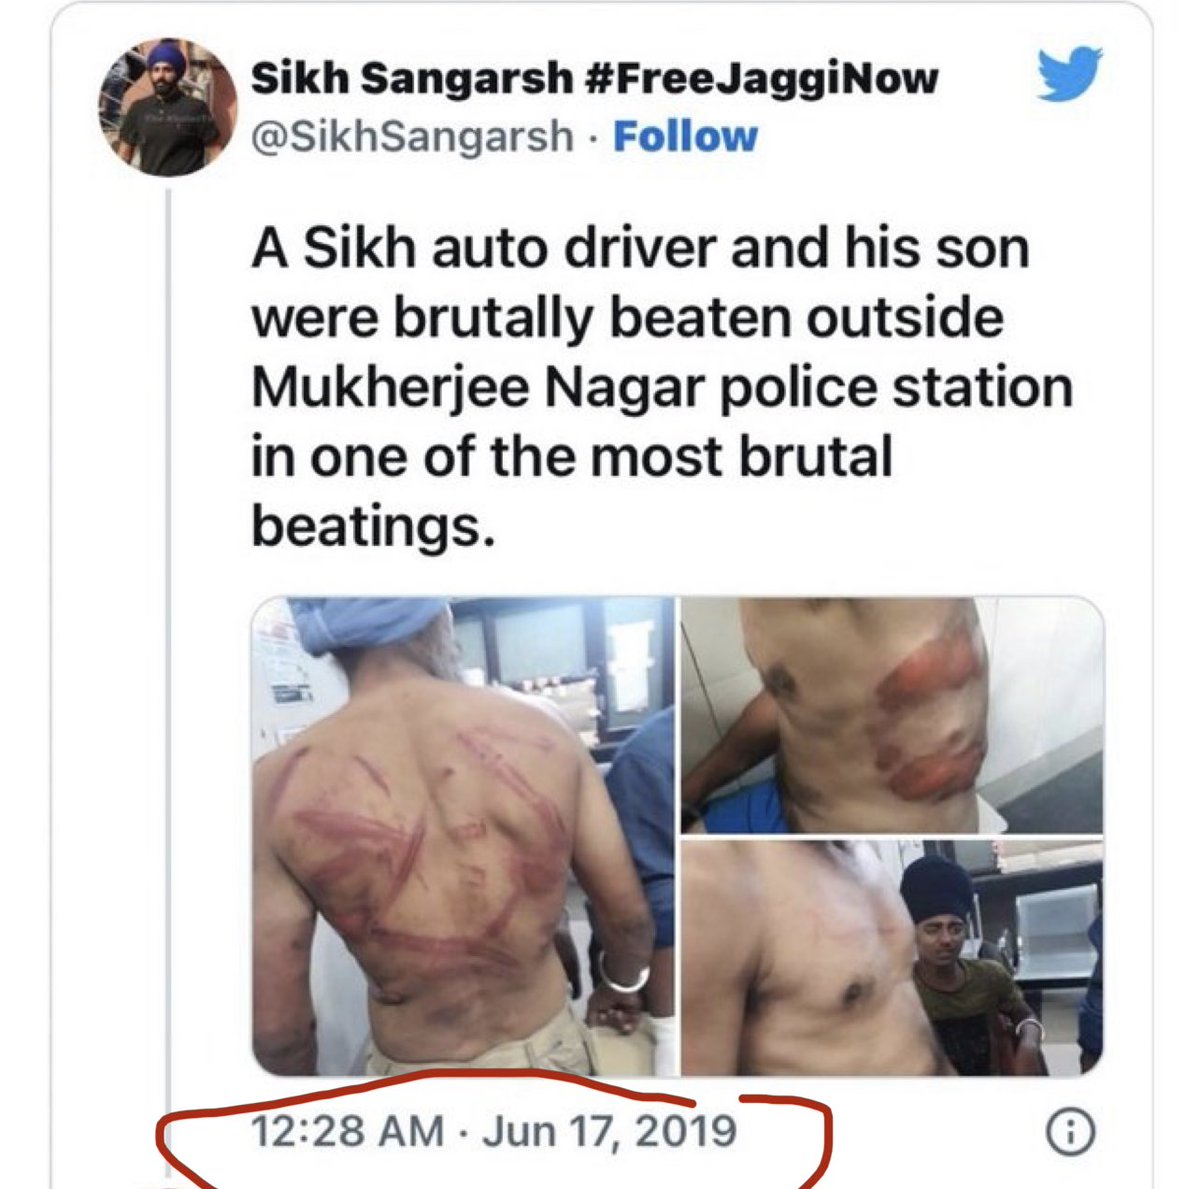 What a fall @SakshiMalik ! You are tweeting pictures from another incident that happened in 2019! You were someone highly respected and applauded, you were hailed as a hero who made India proud, and to see you resorting to spreading misinformation and falsehoods, it is